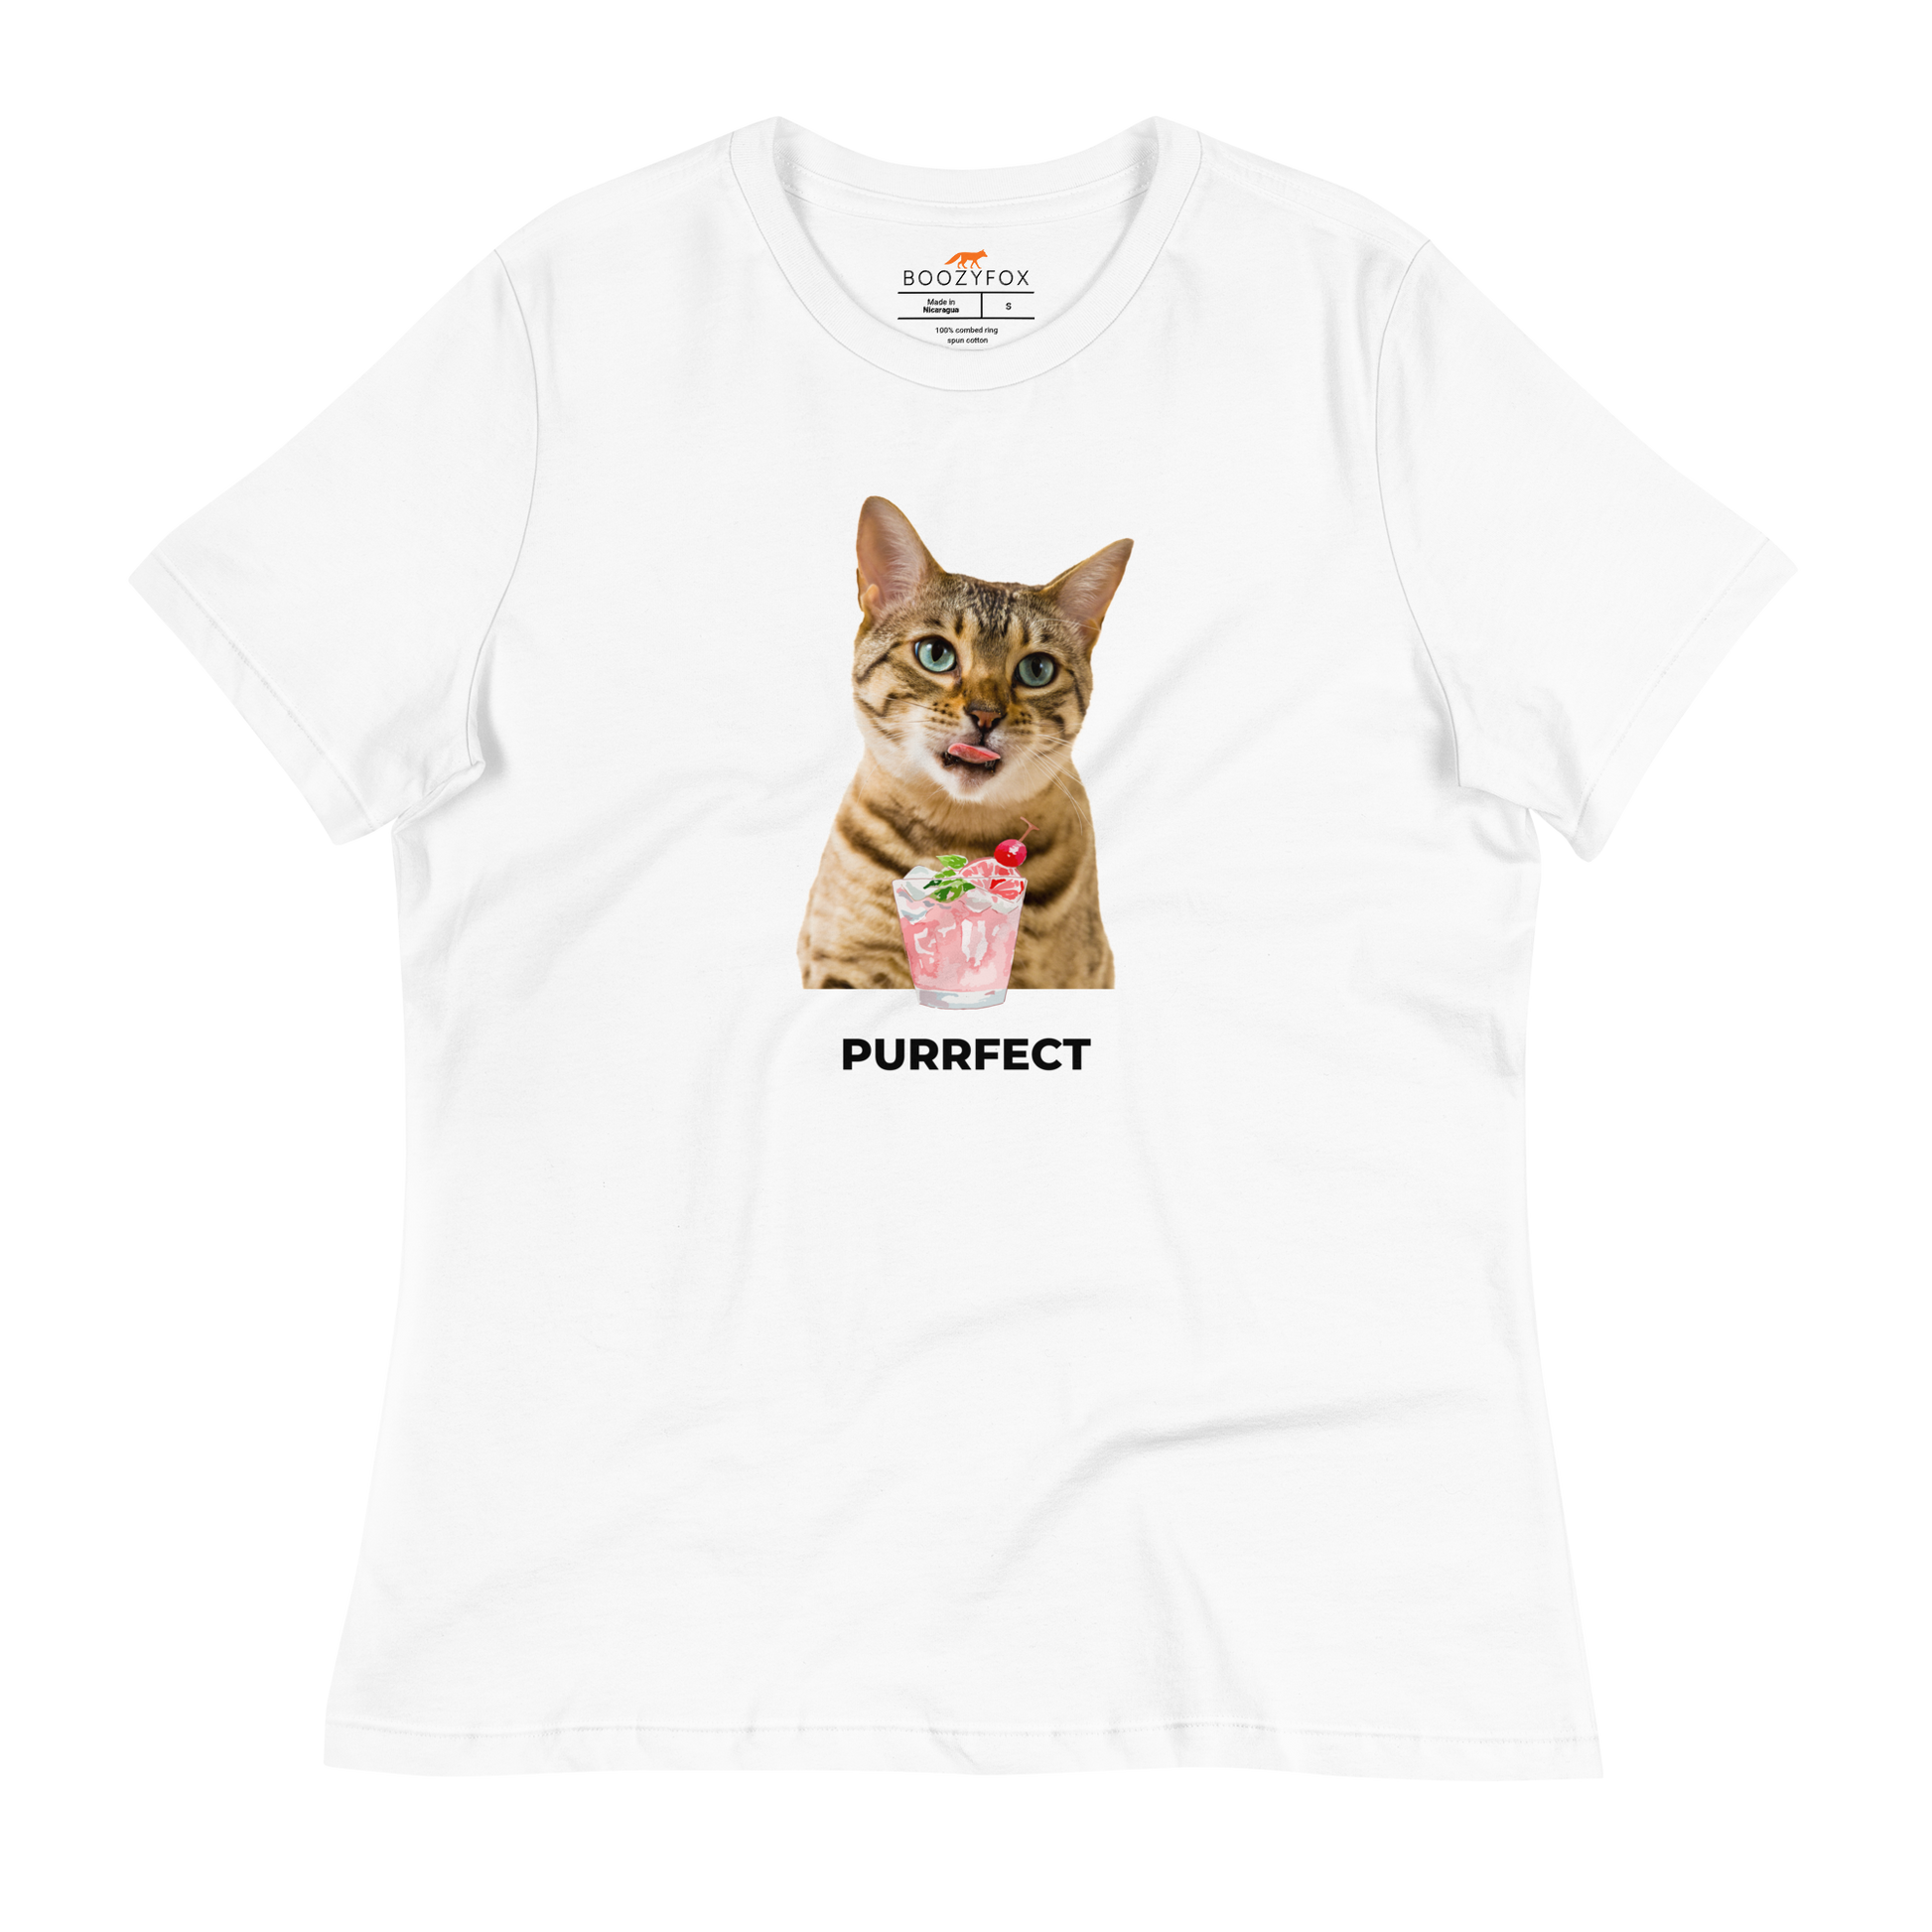 Women's relaxed white cat t-shirt featuring a hilarious Purrfect graphic on the chest - Women's Funny Graphic Cat Tees - Boozy Fox